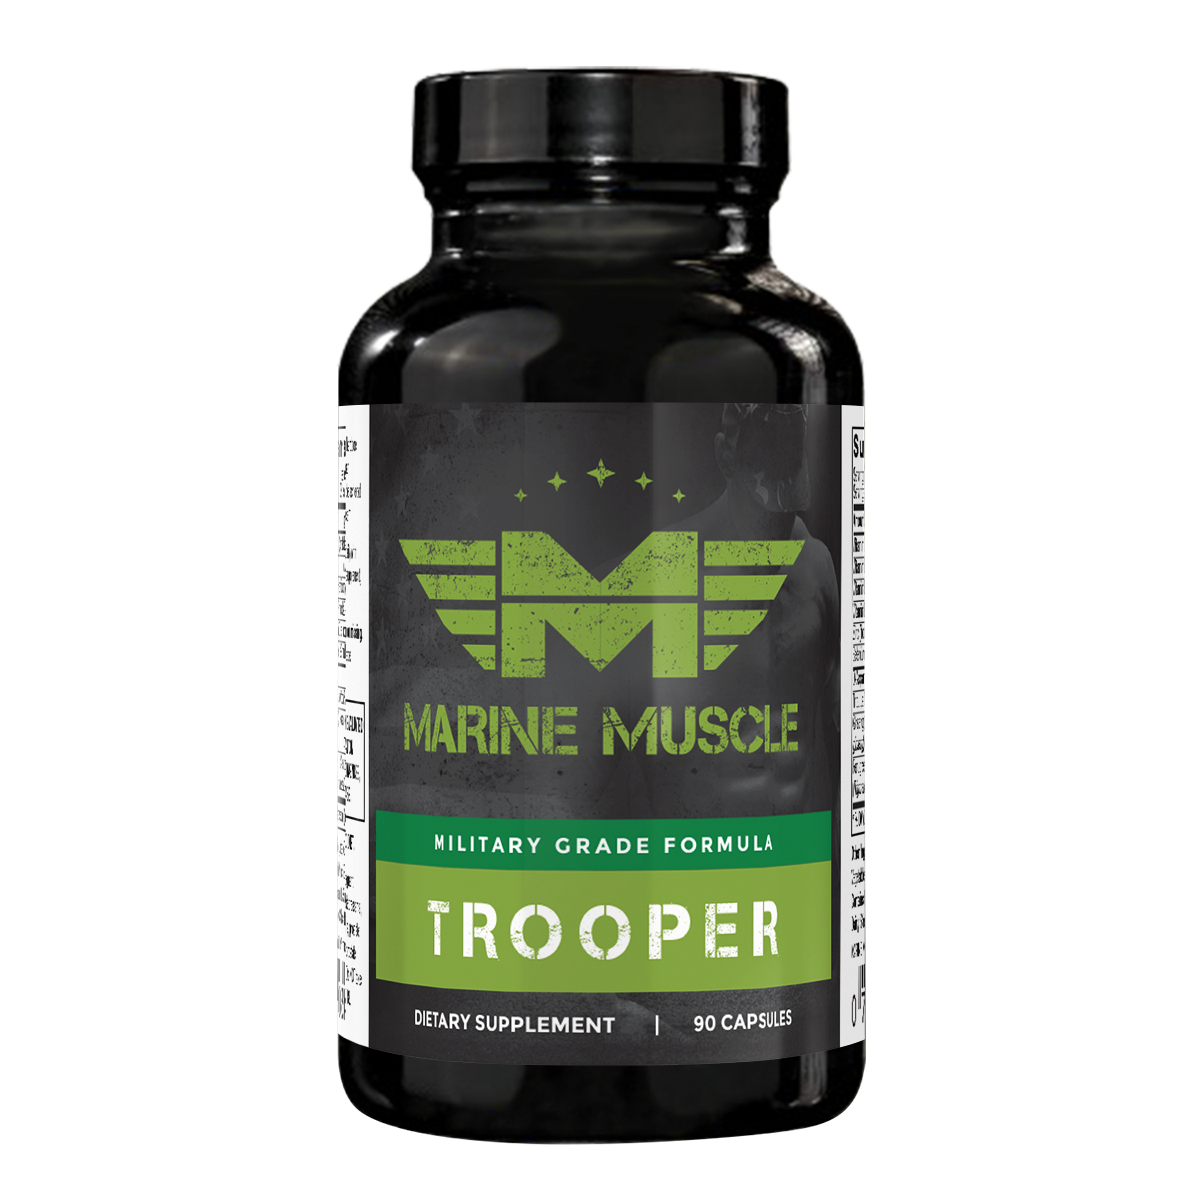 Marine Muscle Trooper Review